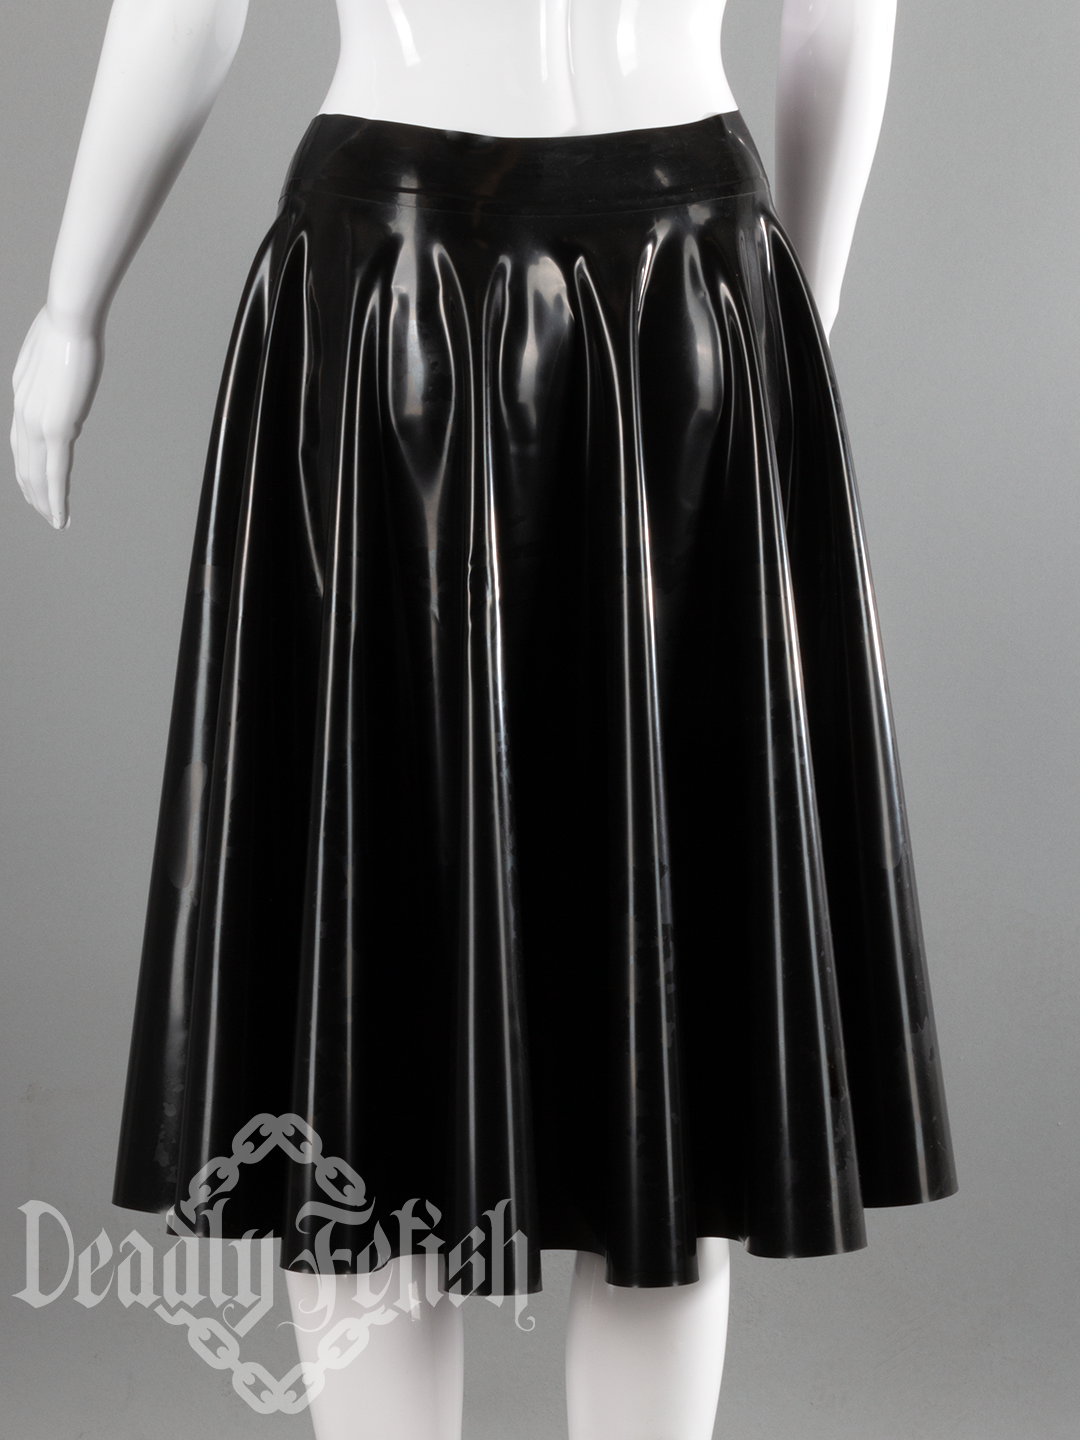 Deadly Fetish Made-to-Order Latex: Skirt #21